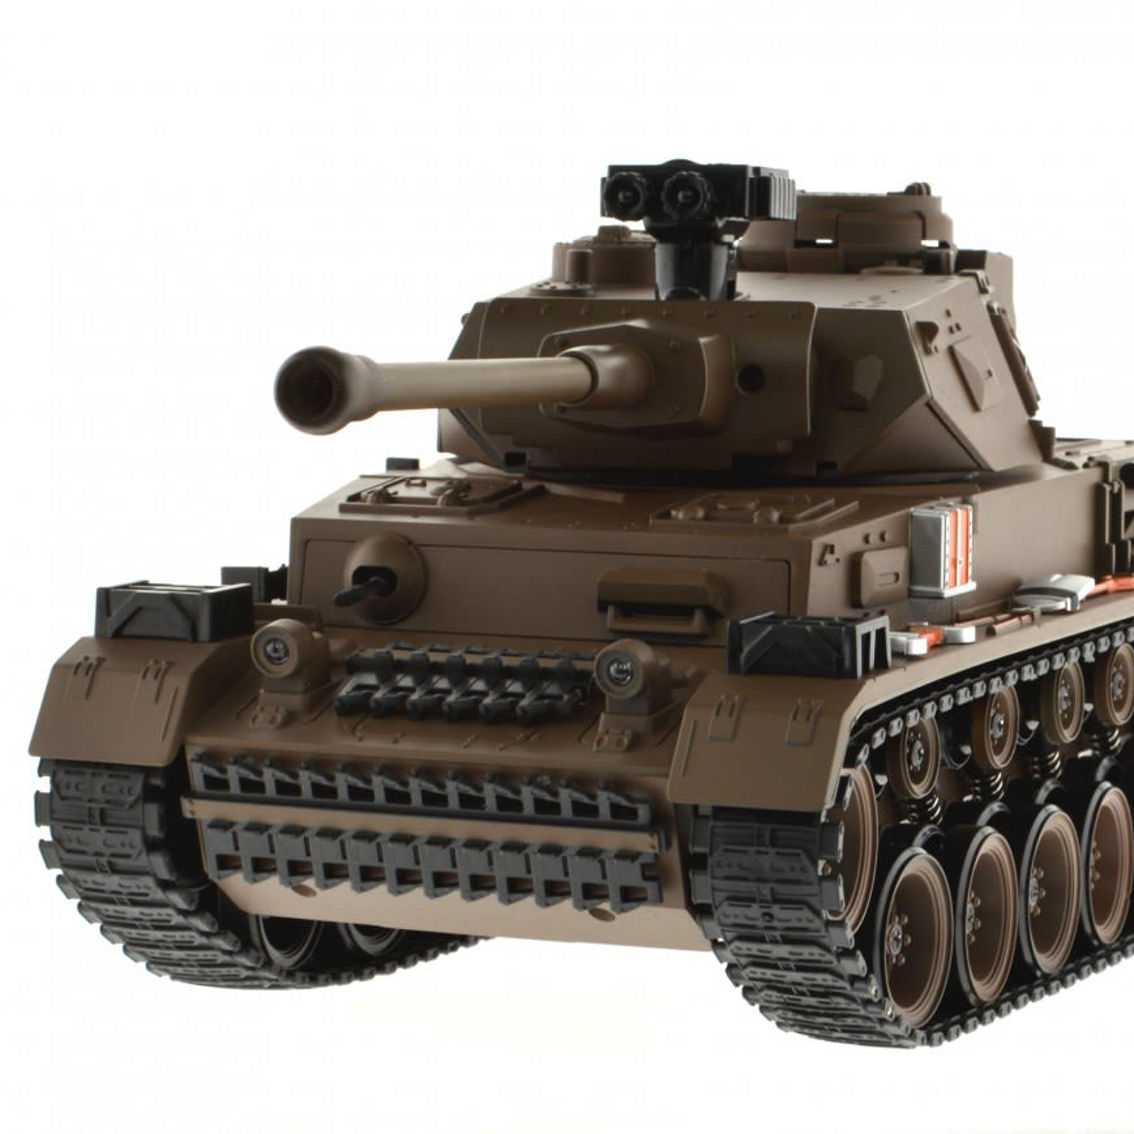 CIS-YZ-826 1:18 scale WWII German Panther tank with lights sound and BB gun - Image 5 of 5